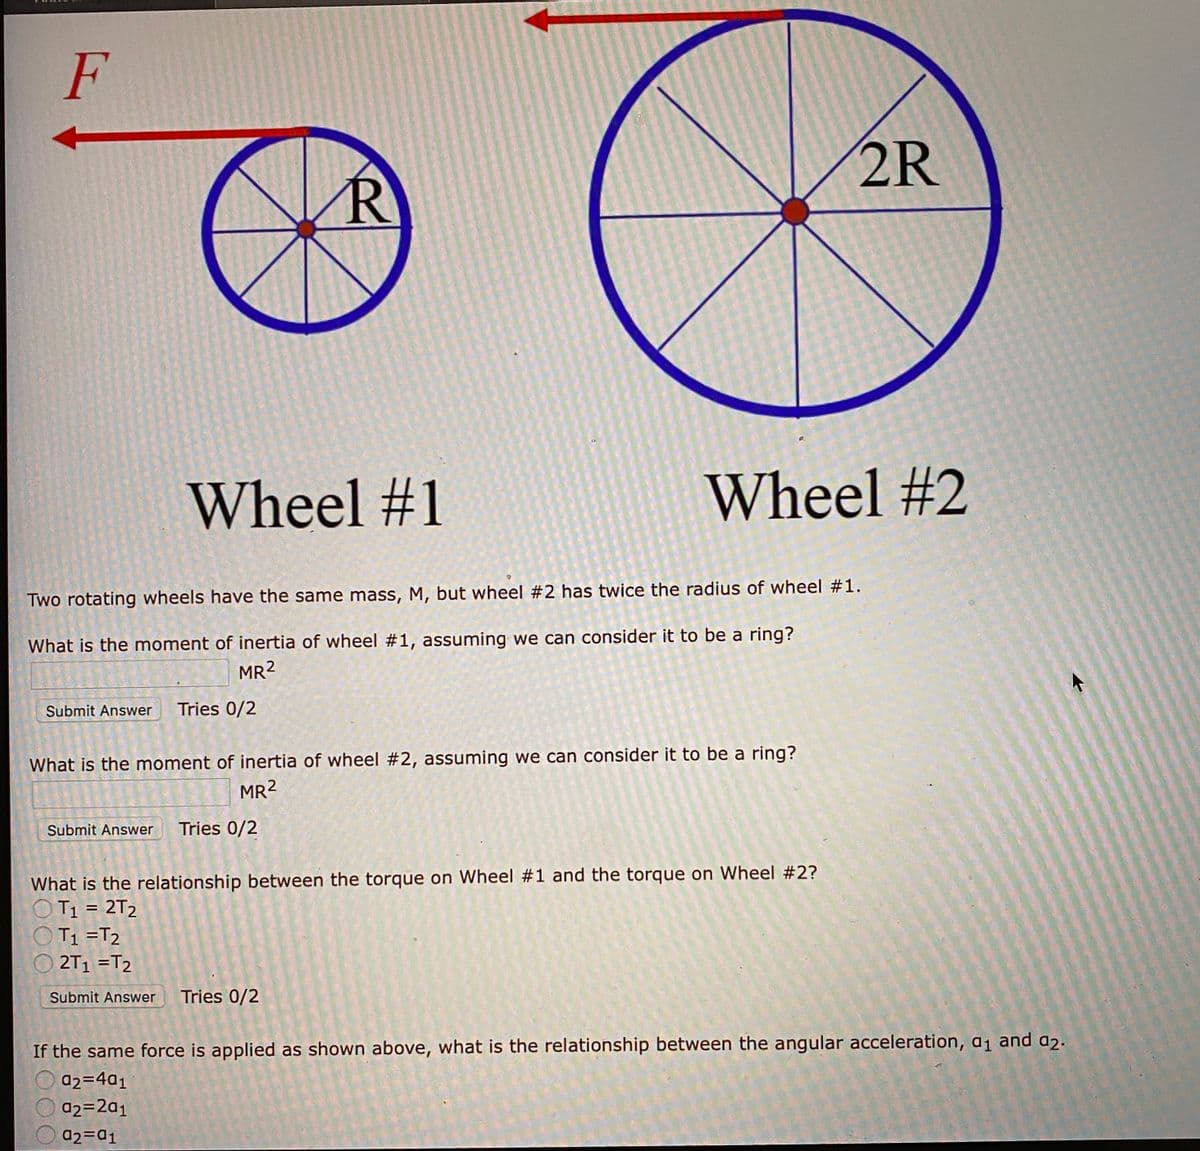 F
2R
Wheel #1
Wheel #2
Two rotating wheels have the same mass, M, but wheel #2 has twice the radius of wheel #1.
What is the moment of inertia of wheel #1, assuming we can consider it to be a ring?
MR2
Submit Answer
Tries 0/2
What is the moment of inertia of wheel #2, assuming we can consider it to be a ring?
MR2
Submit Answer
Tries 0/2
What is the relationship between the torque on Wheel #1 and the torque on Wheel #2?
T1 = 2T2
T1 =T2
O 2T1 =T2
Submit Answer
Tries 0/2
If the same force is applied as shown above, what is the relationship between the angular acceleration, a1 and a2.
a2=4a1
a2=2a1
